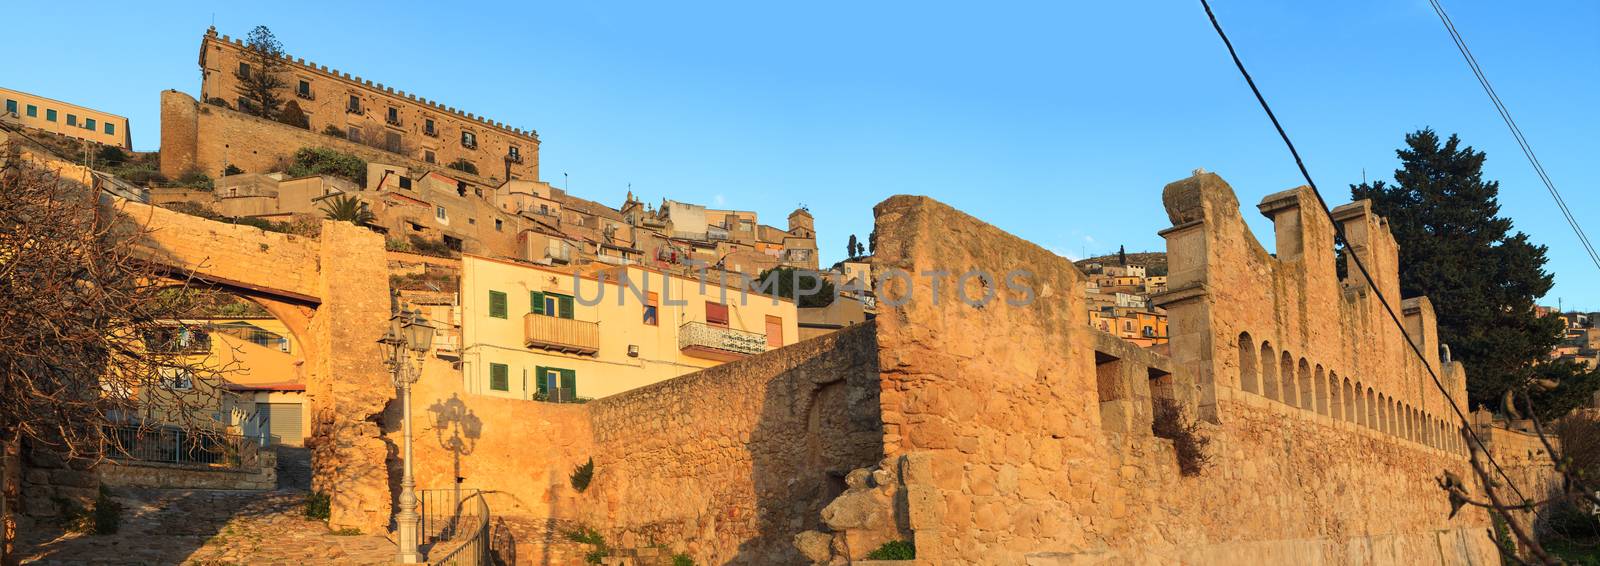 View of Granfonte and Branciforti palace in Leonforte , Sicily